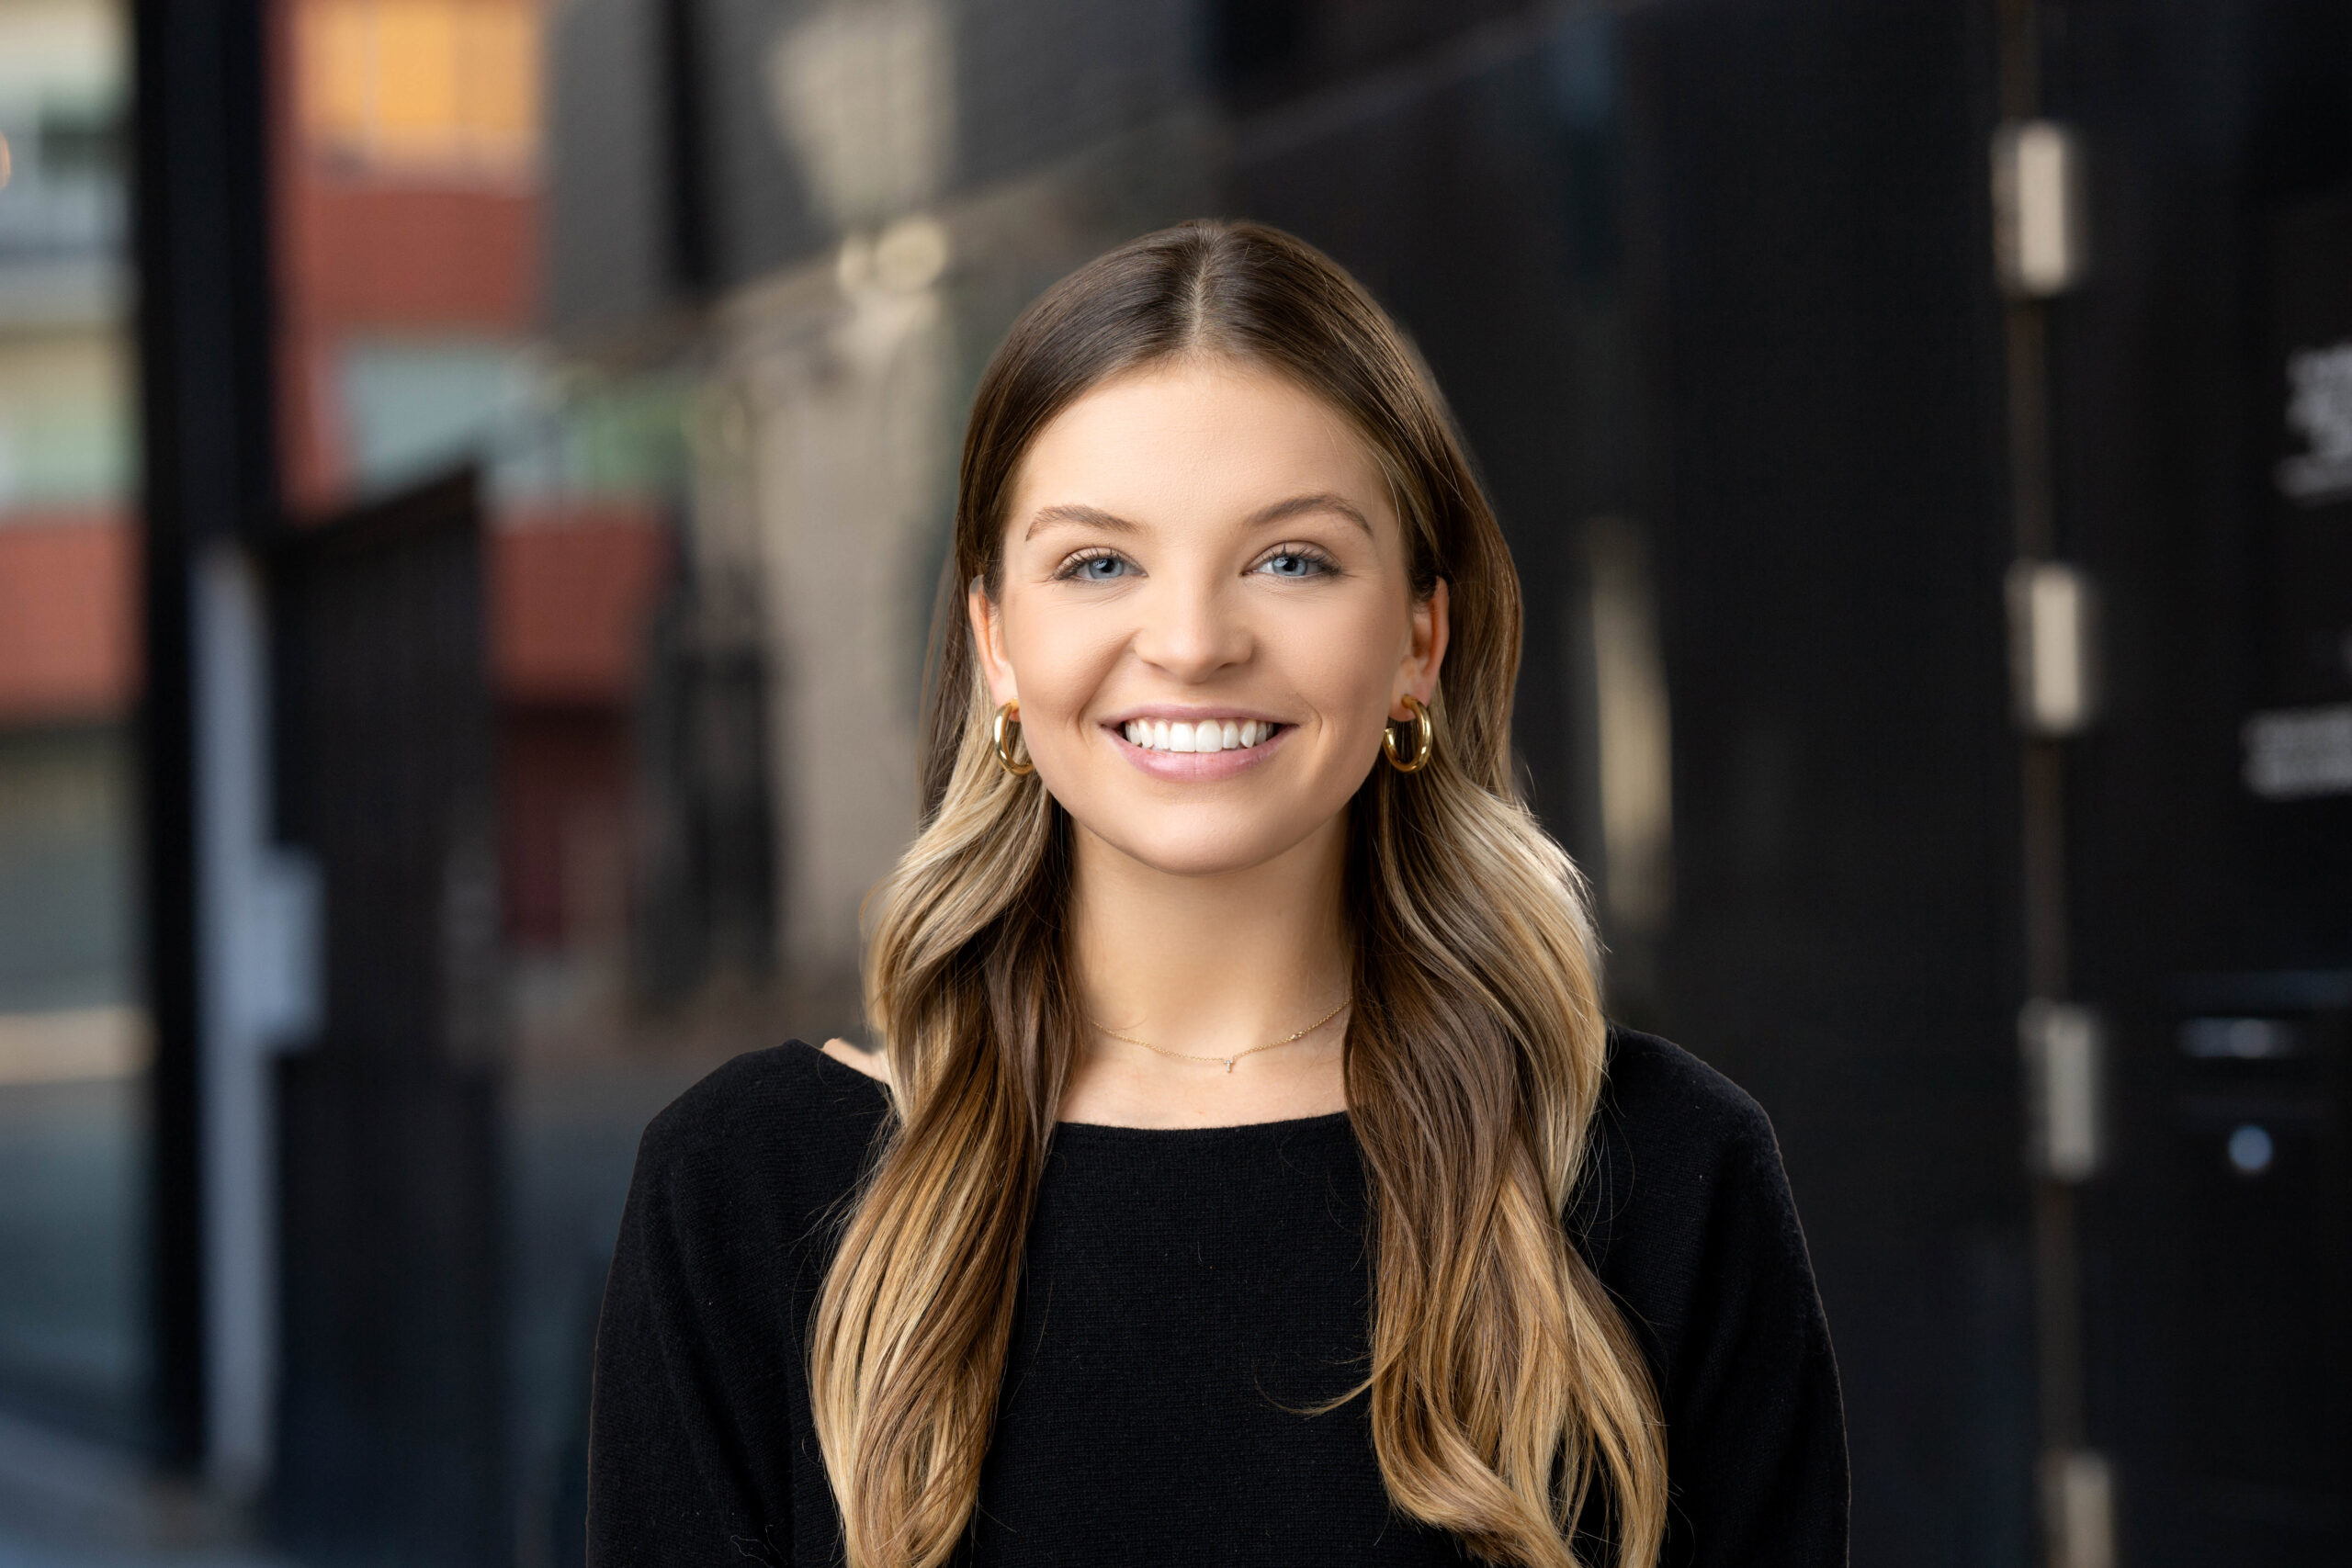 Young woman smiling in professional attire against an urban backdrop for Denver headshots.